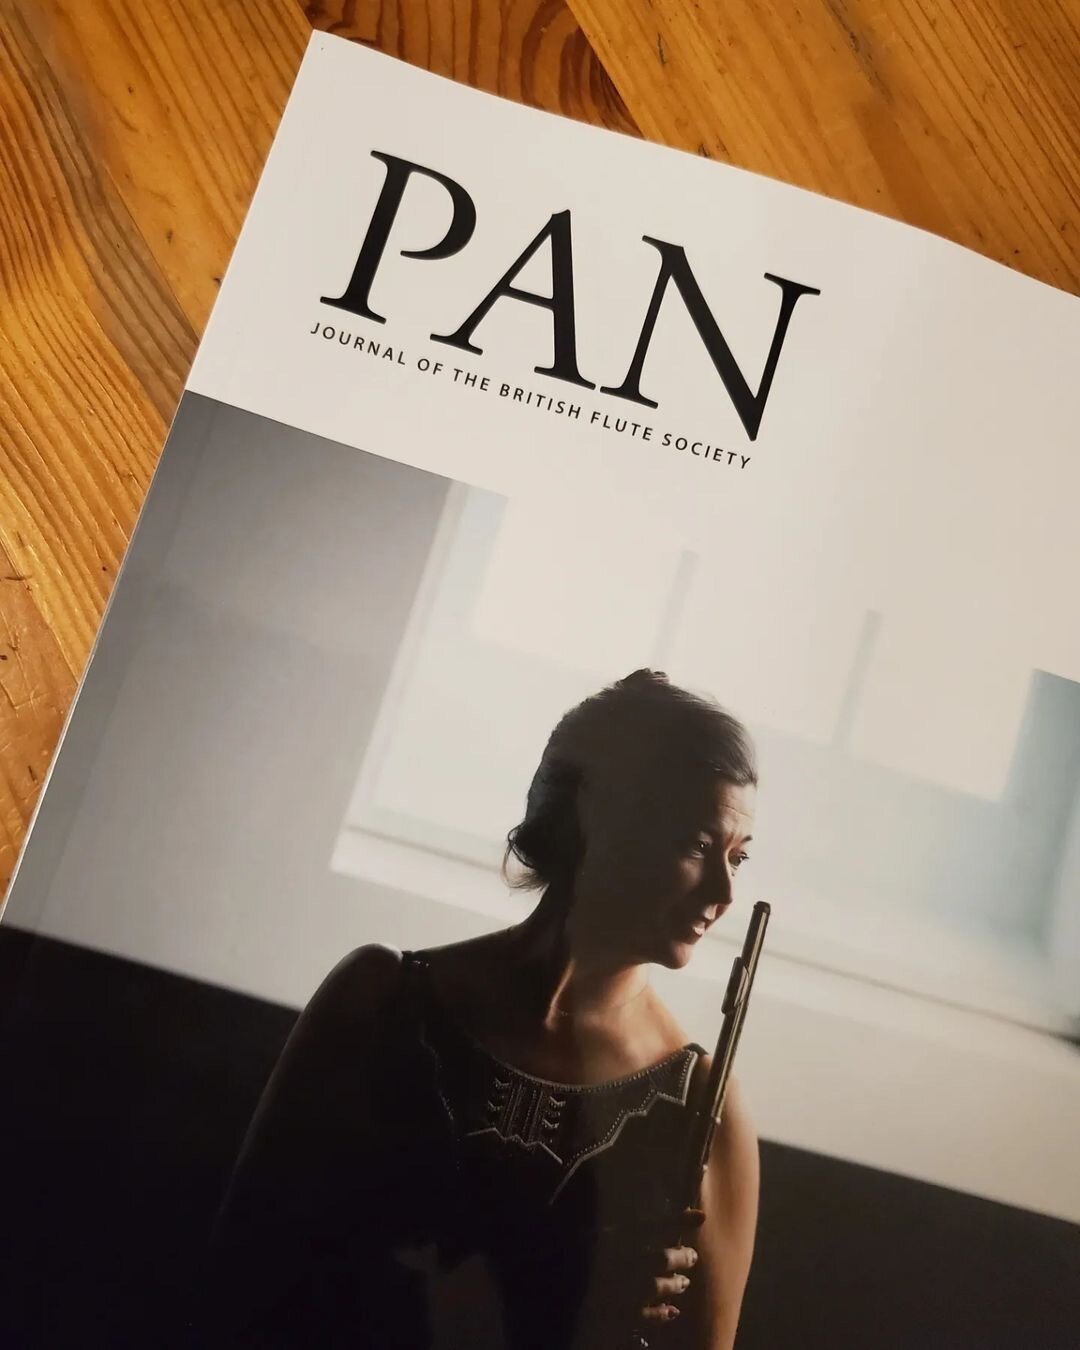 It's nearly time for the next issue of Pan, our flagship journal packed with features, guidance, news &amp; reviews spanning all things flute!

Join us by Sunday 19th to get your hands on a copy (print or digital)! 

Plus, members also receive:

🎵 A